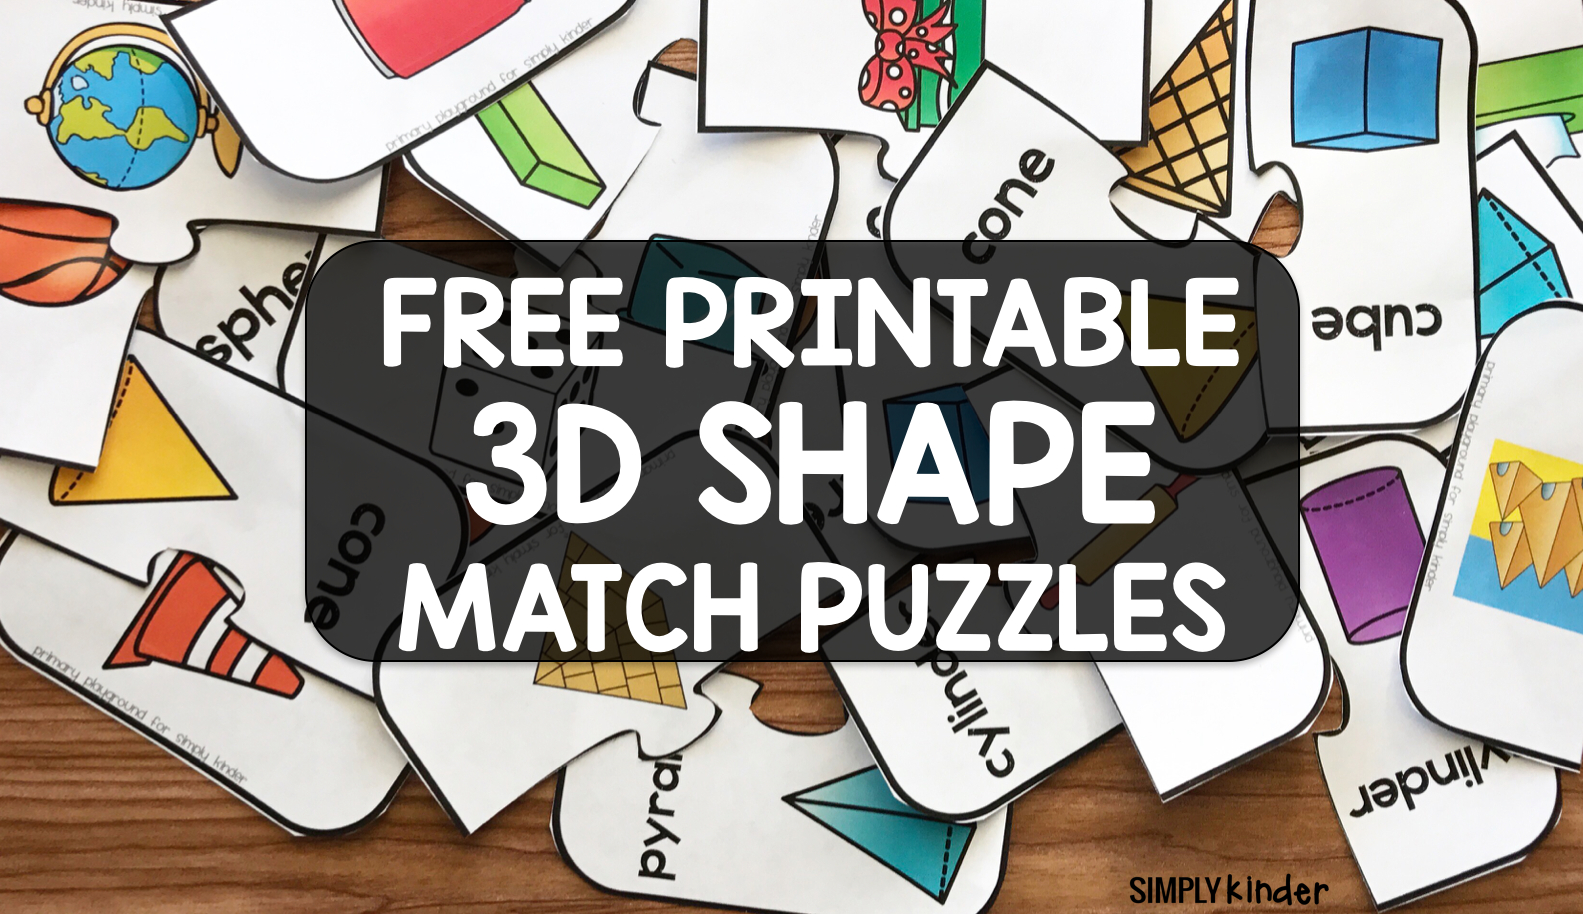 Free Printable 3D Shape Puzzles - Simply Kinder - Free Printable 3D Puzzles